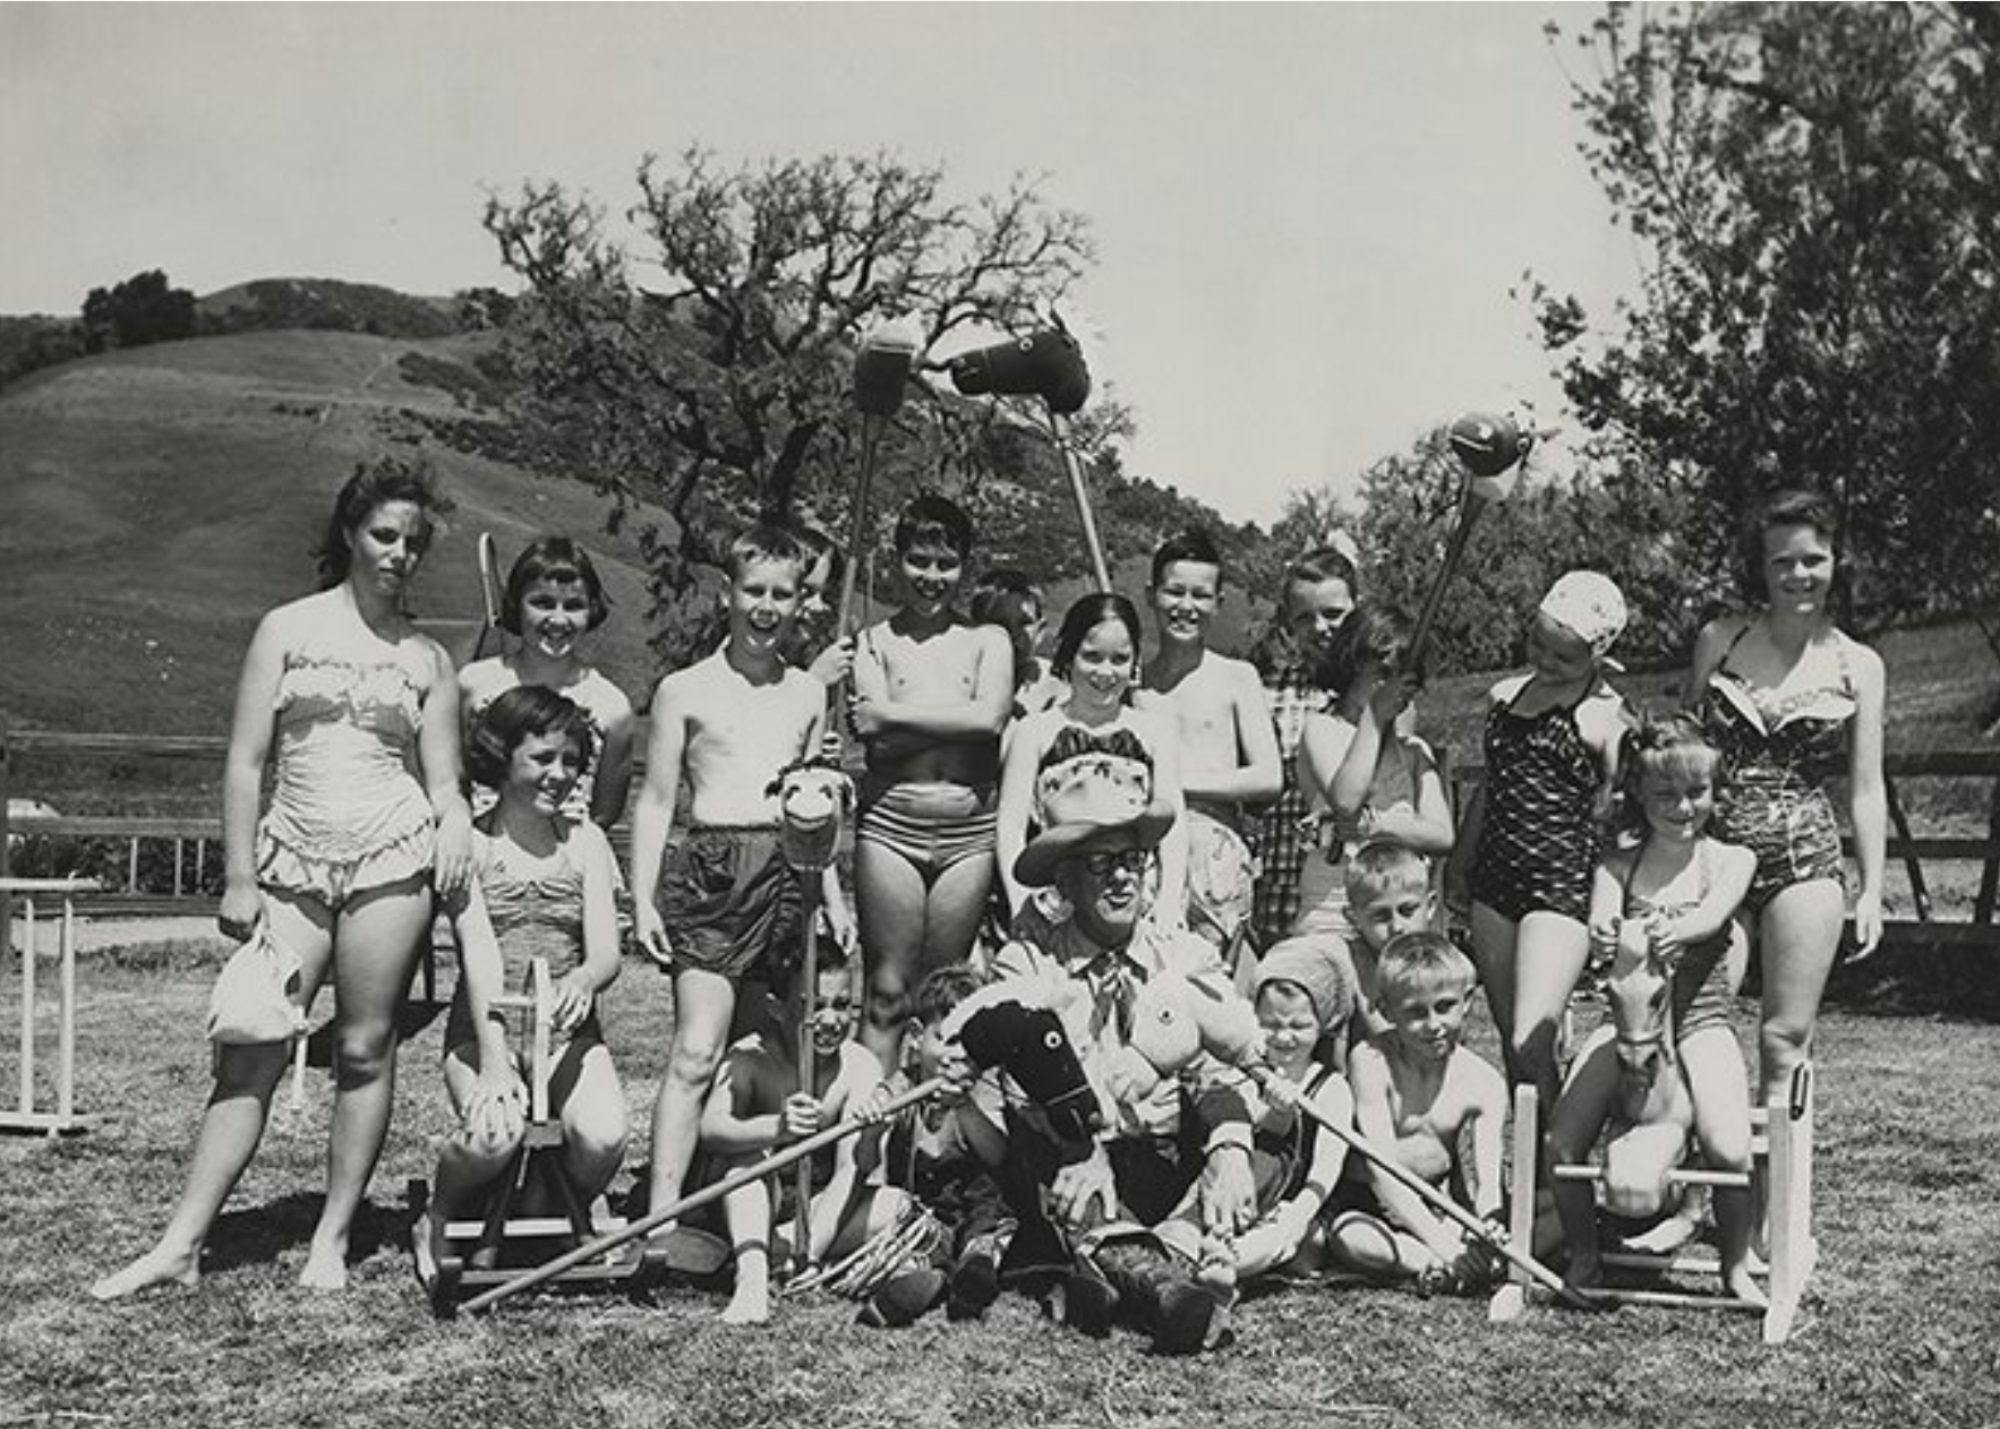 historic photo of people and kids in posing with stick horses